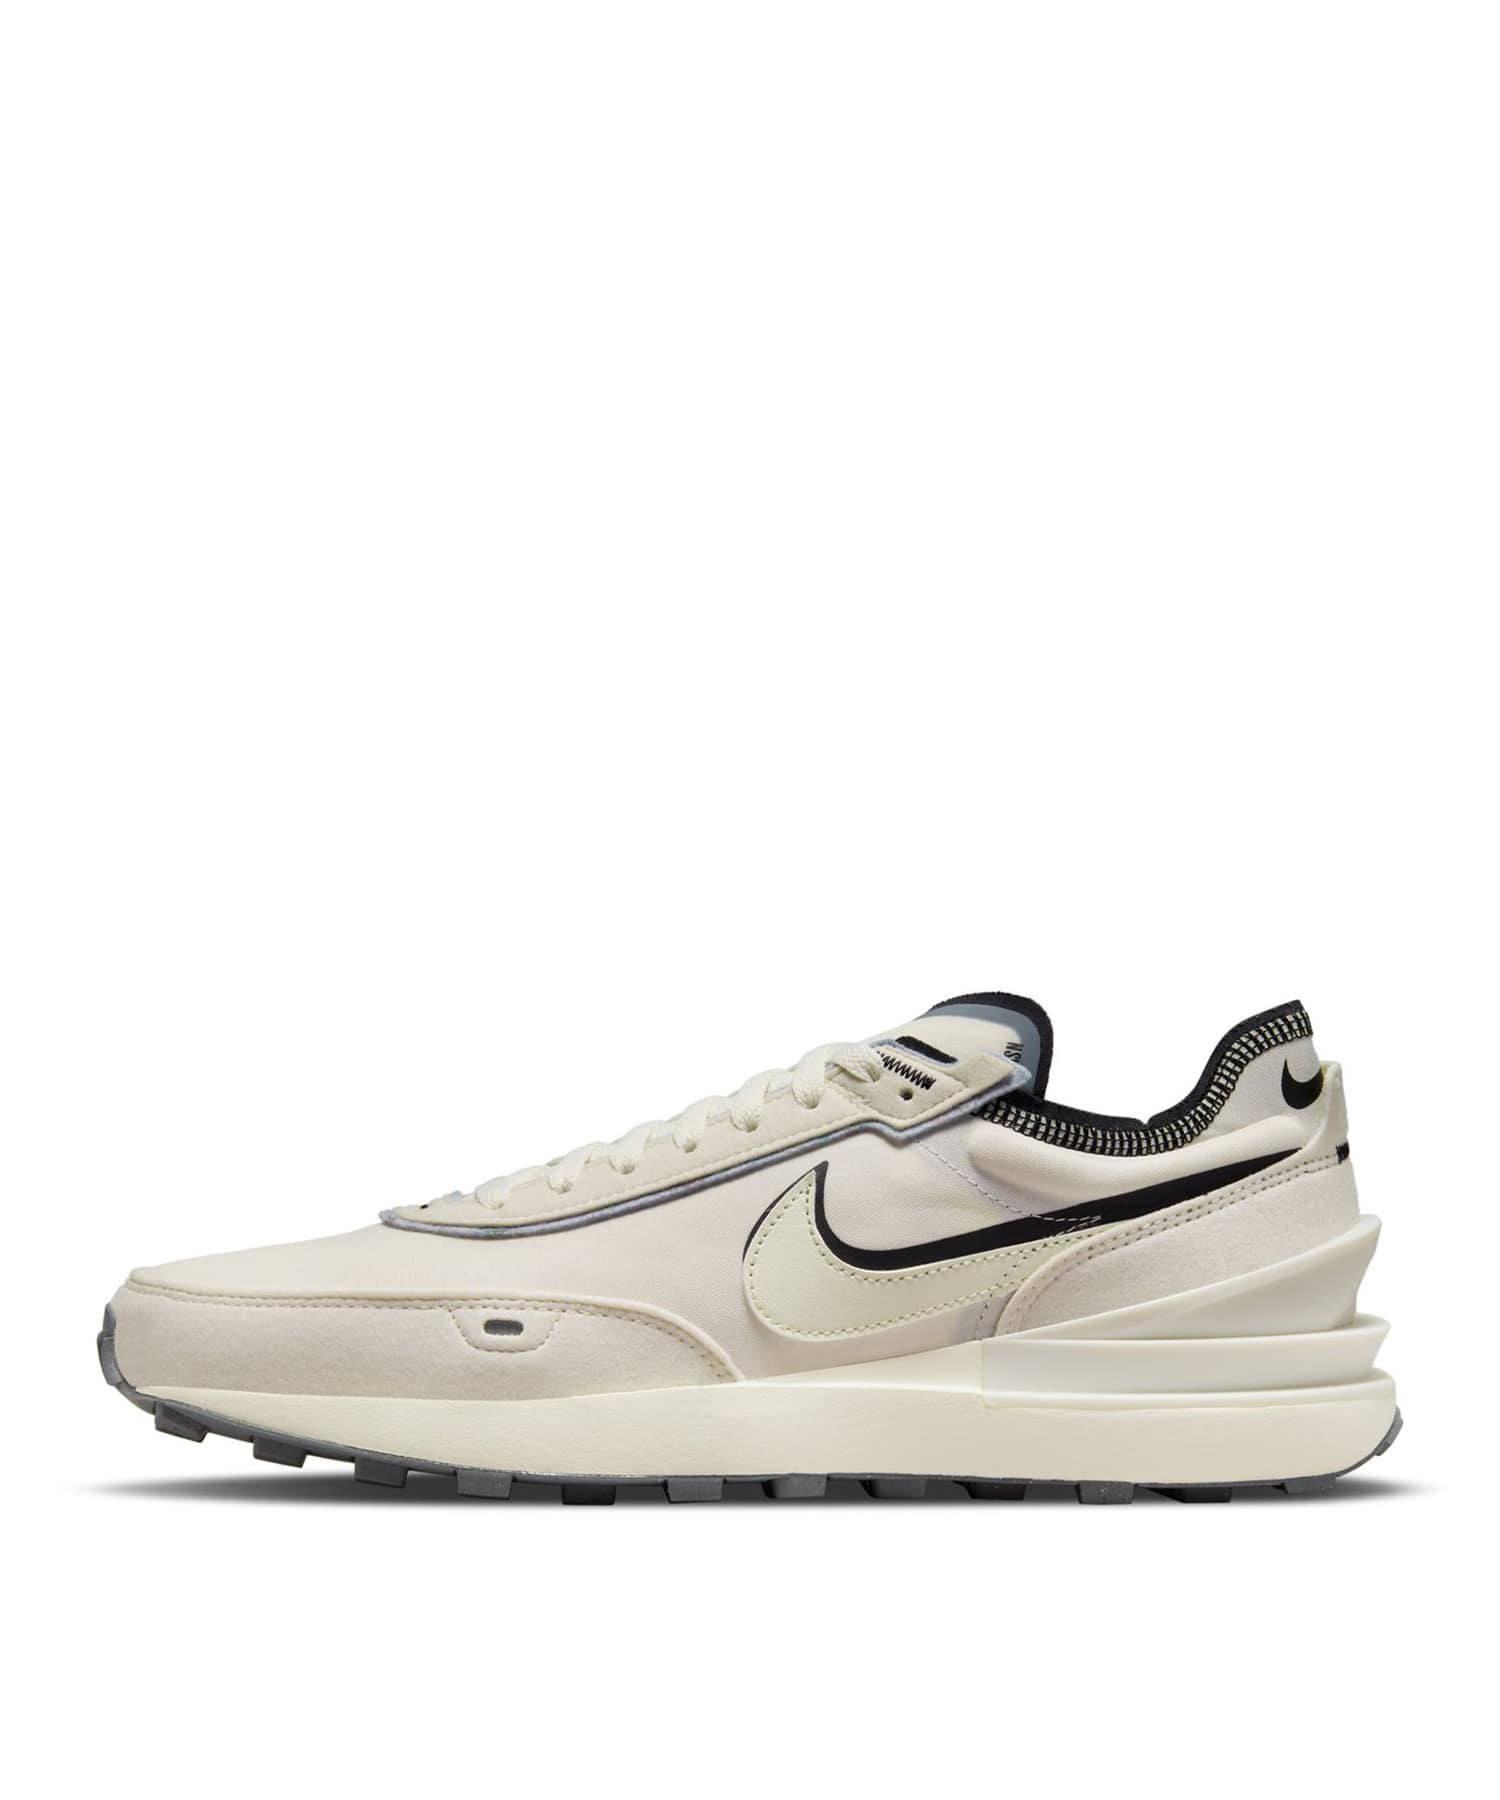 NIKE / WAFFLE ONE SE｜ESTNATION ONLINE STORE｜エストネーション 公式通販